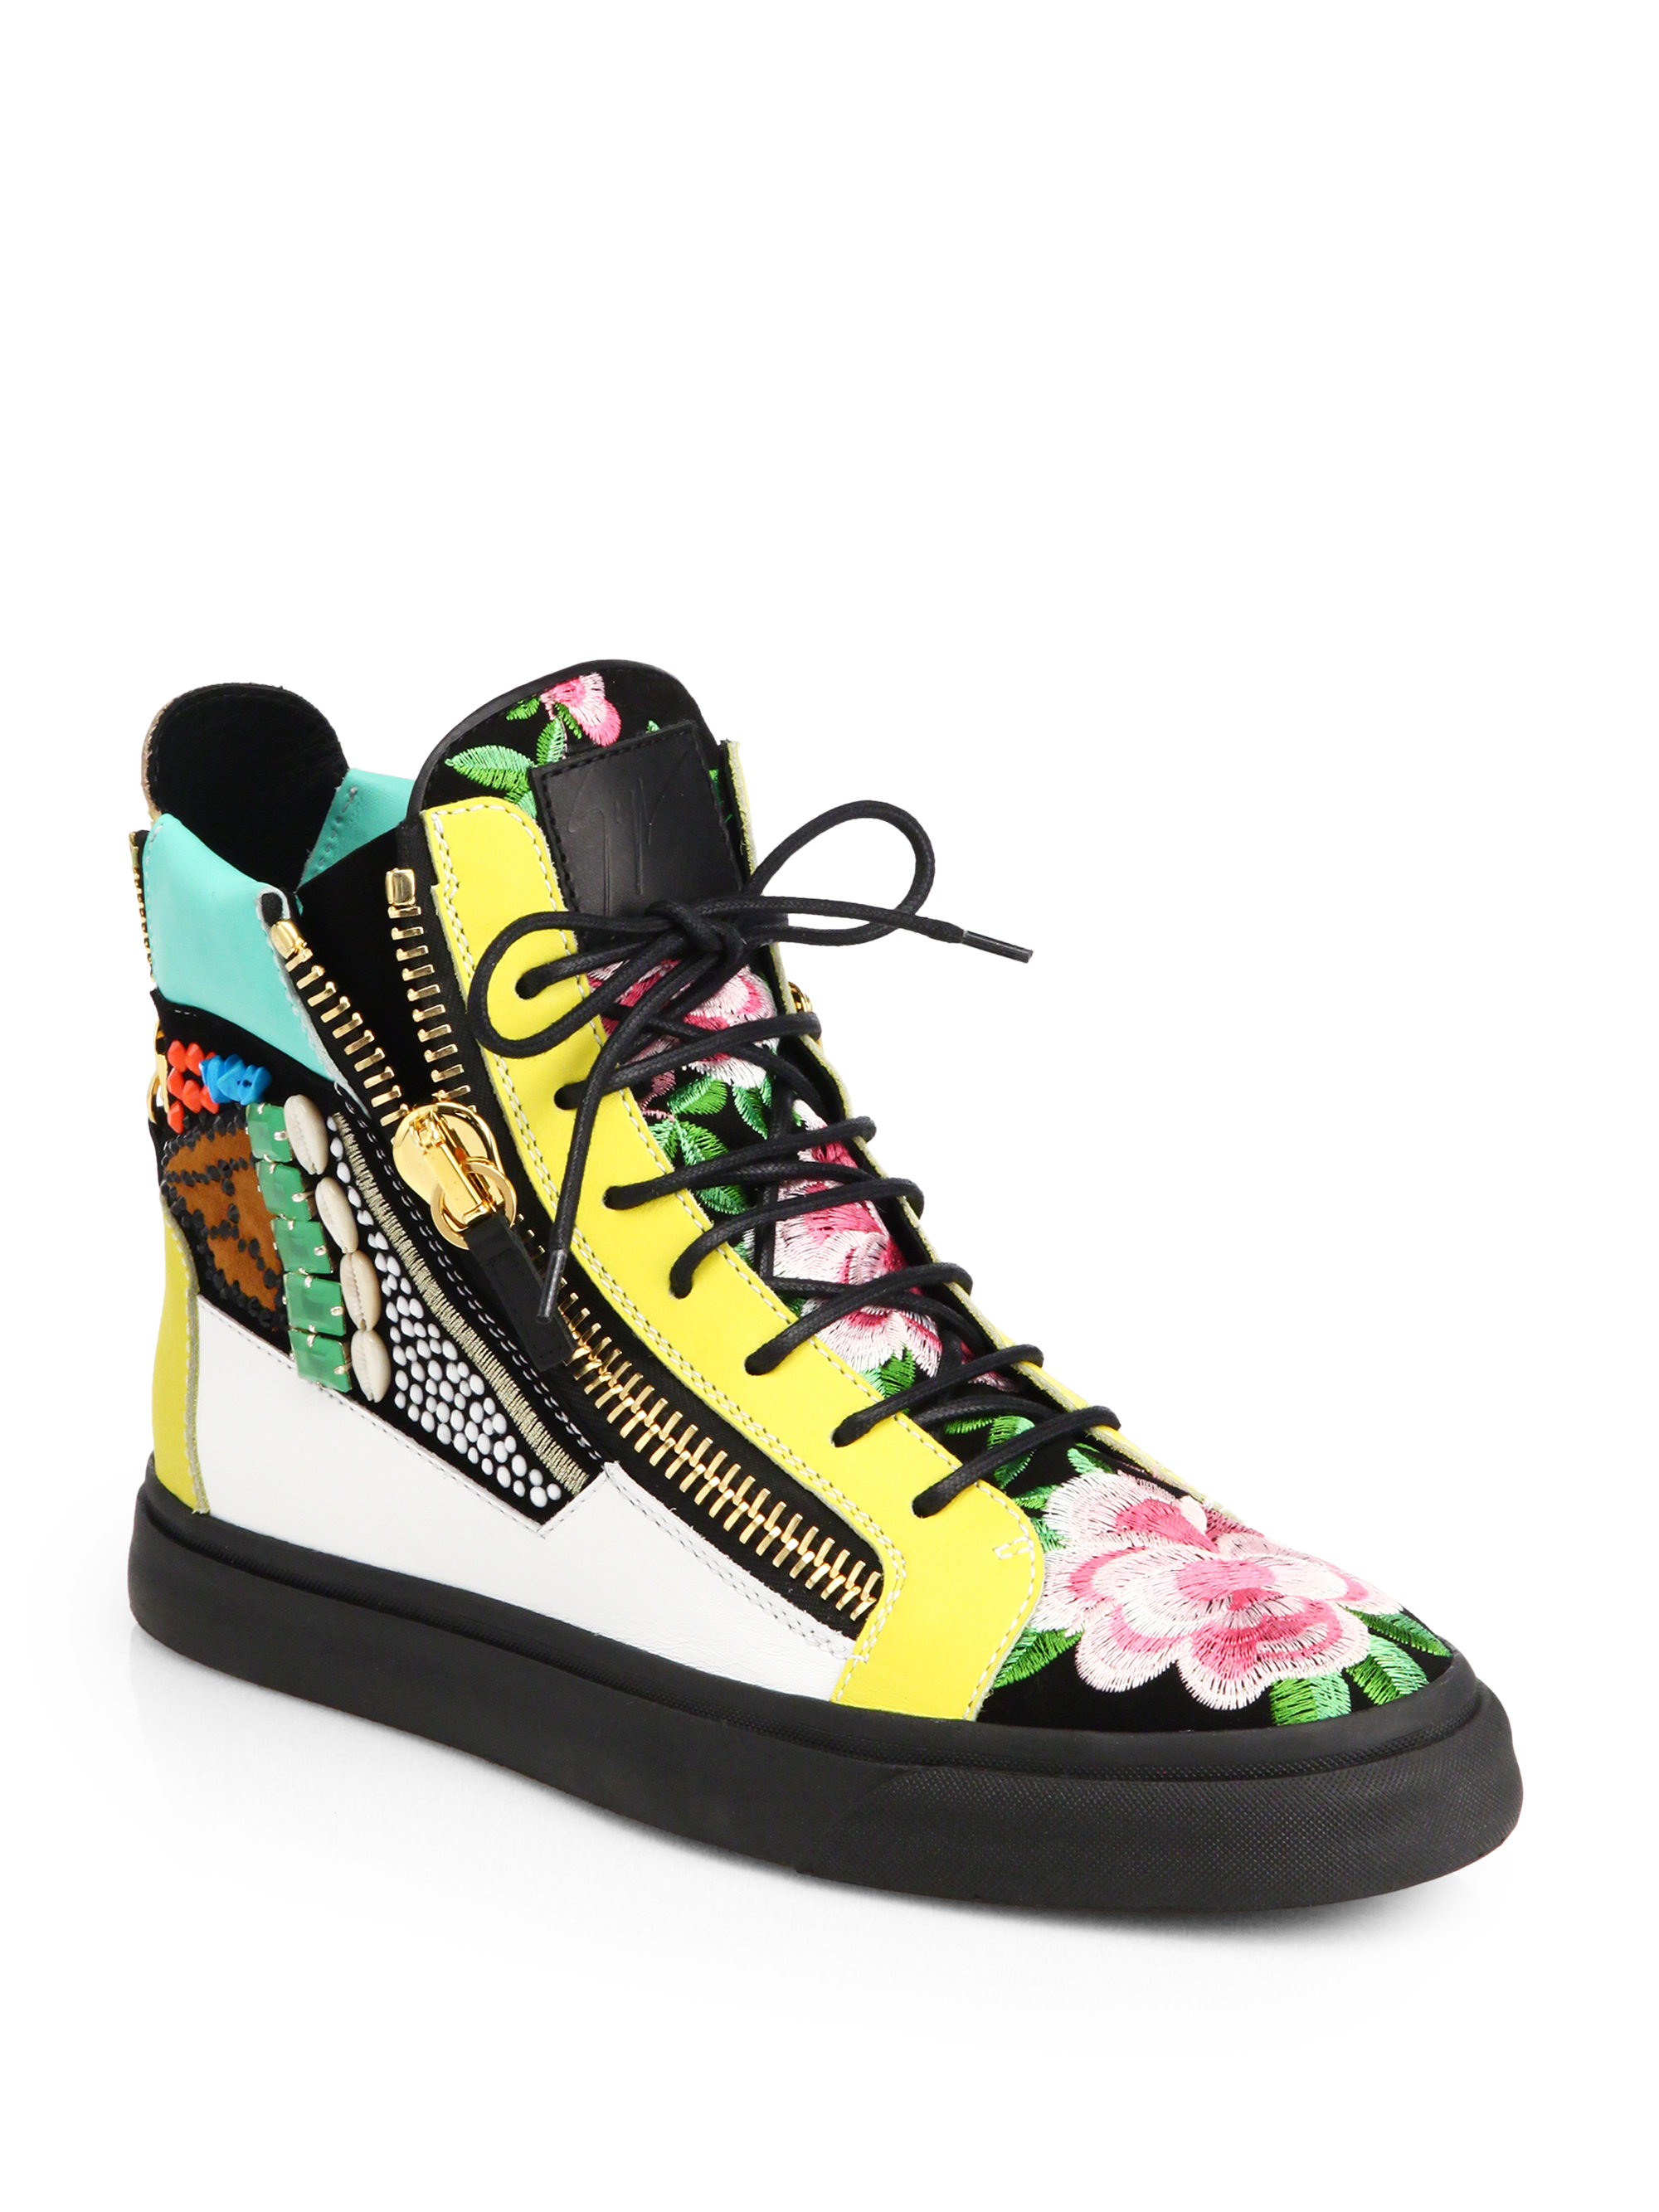 Giuseppe Zanotti Floral Mixed Media High-Top Sneakers for Men - Lyst